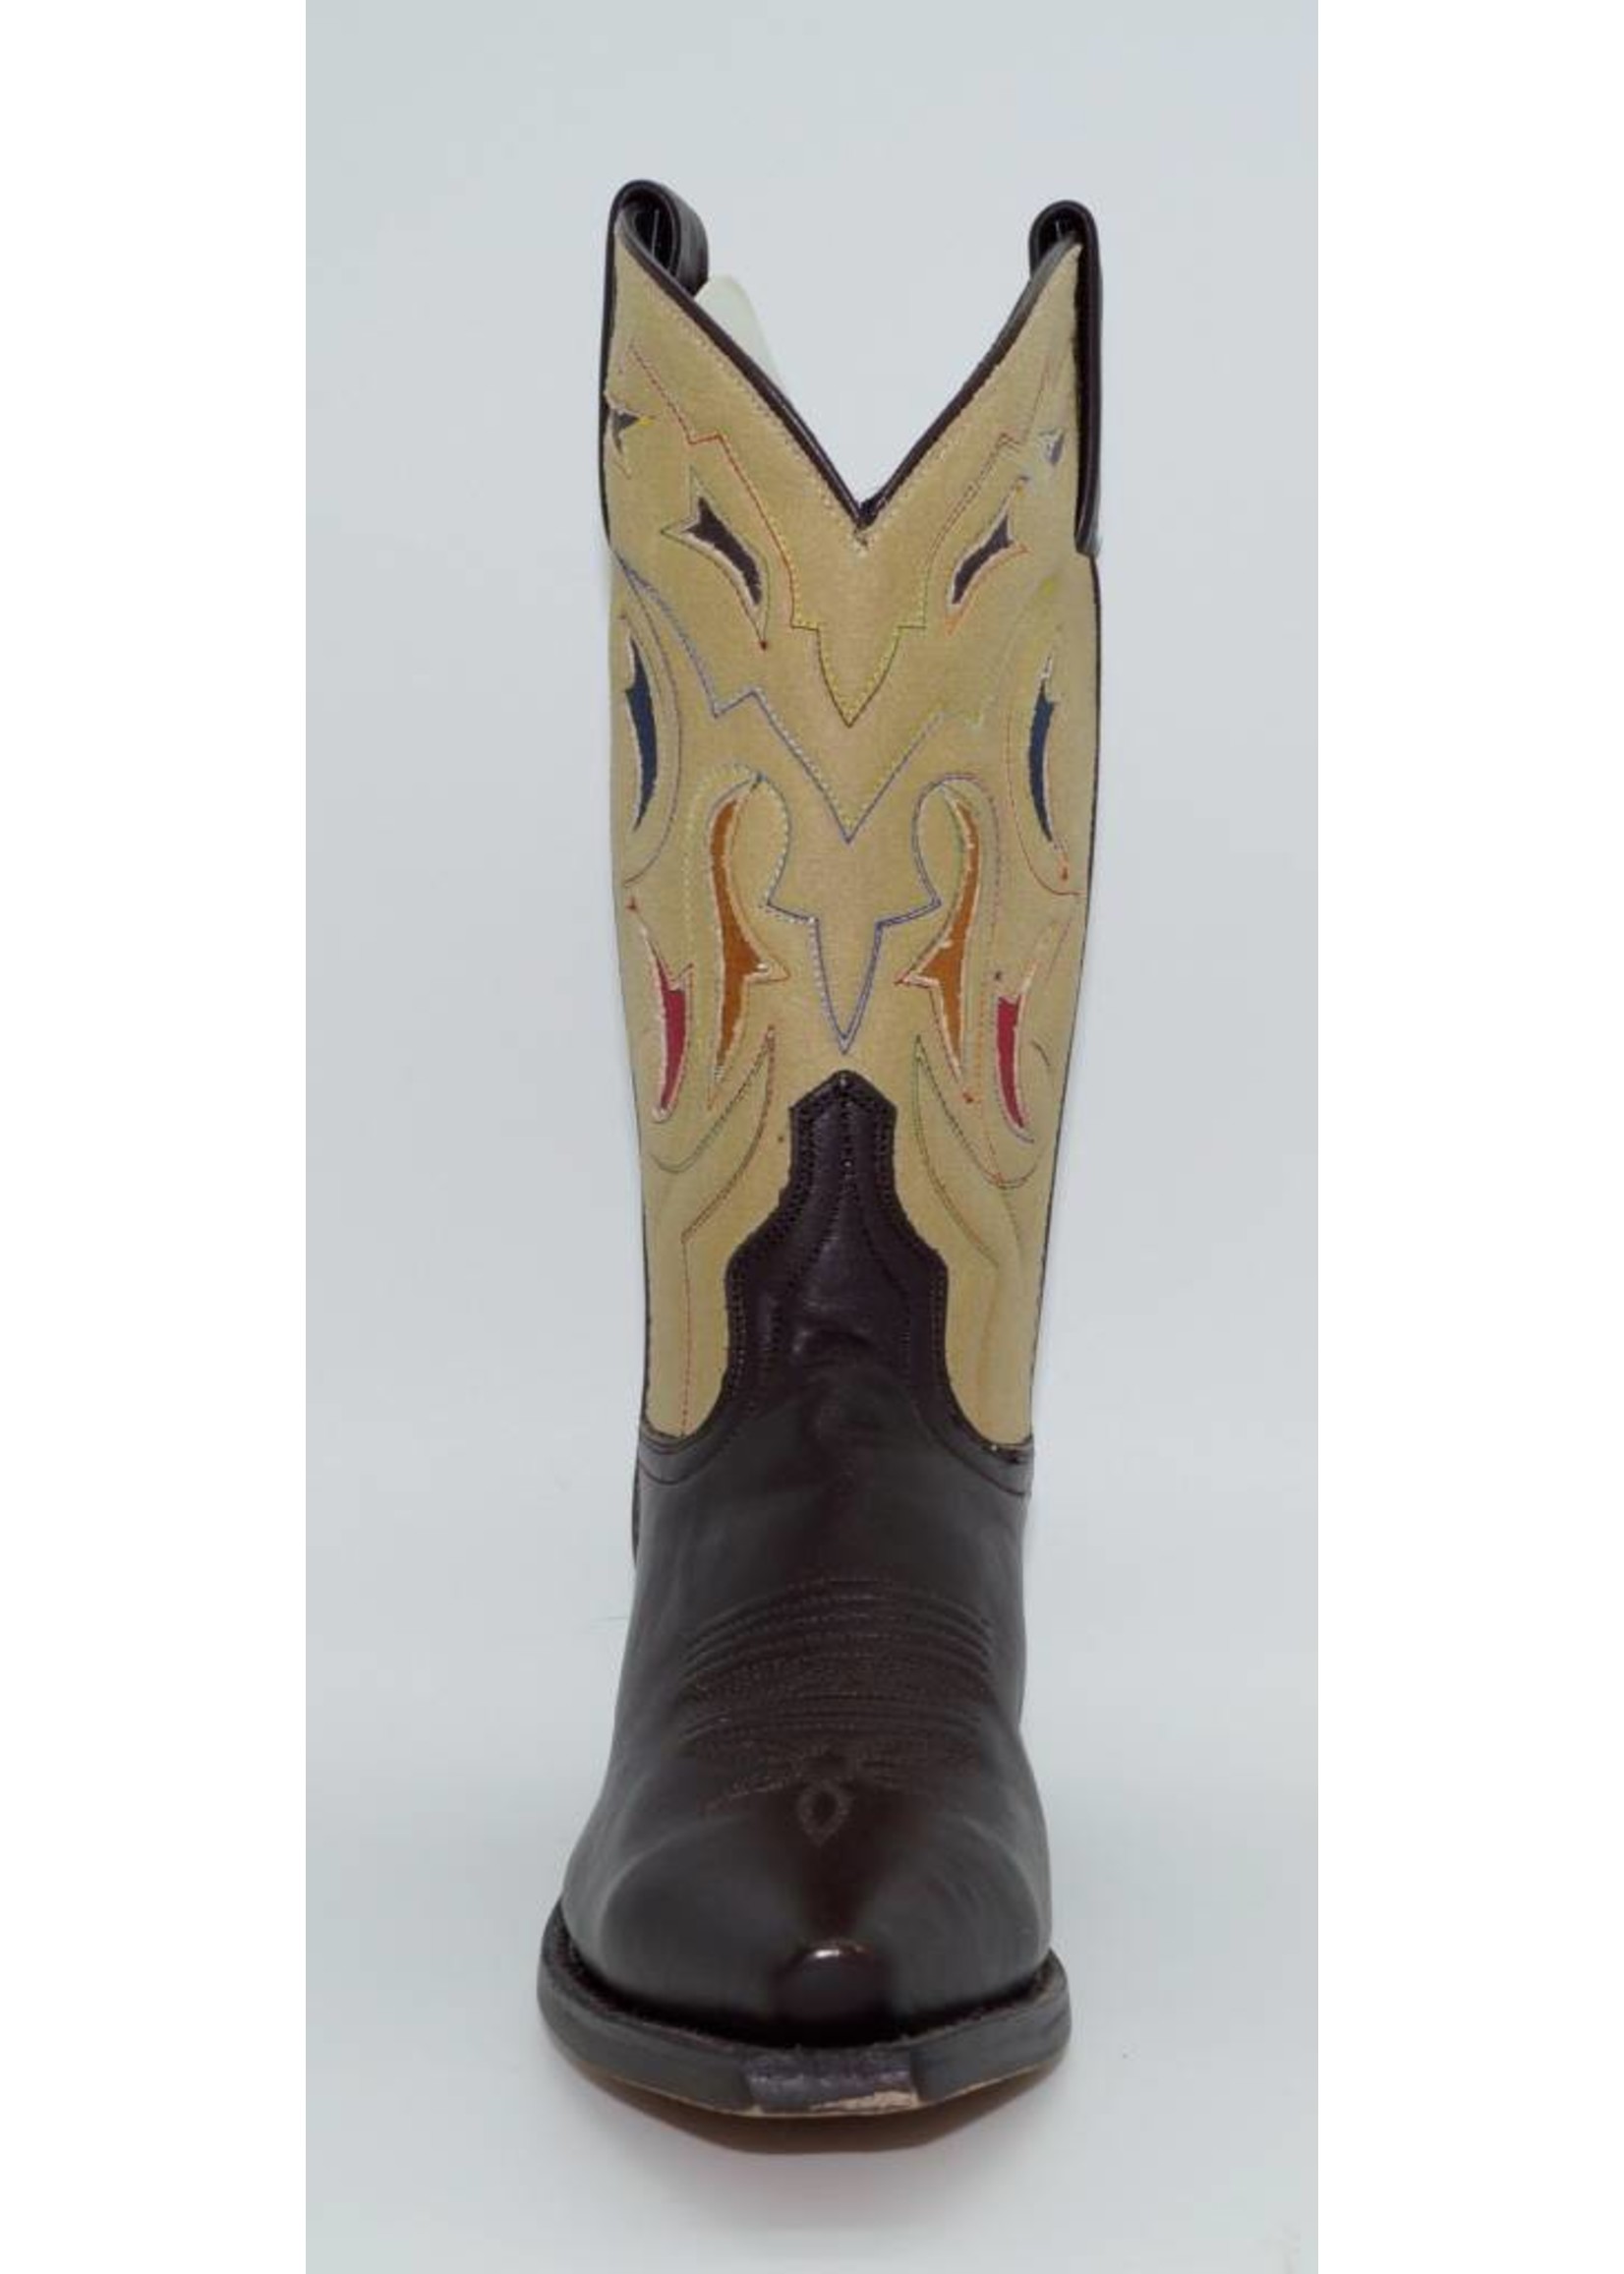 Laredo Women's Brown Inlay Leather Western Boots 4566